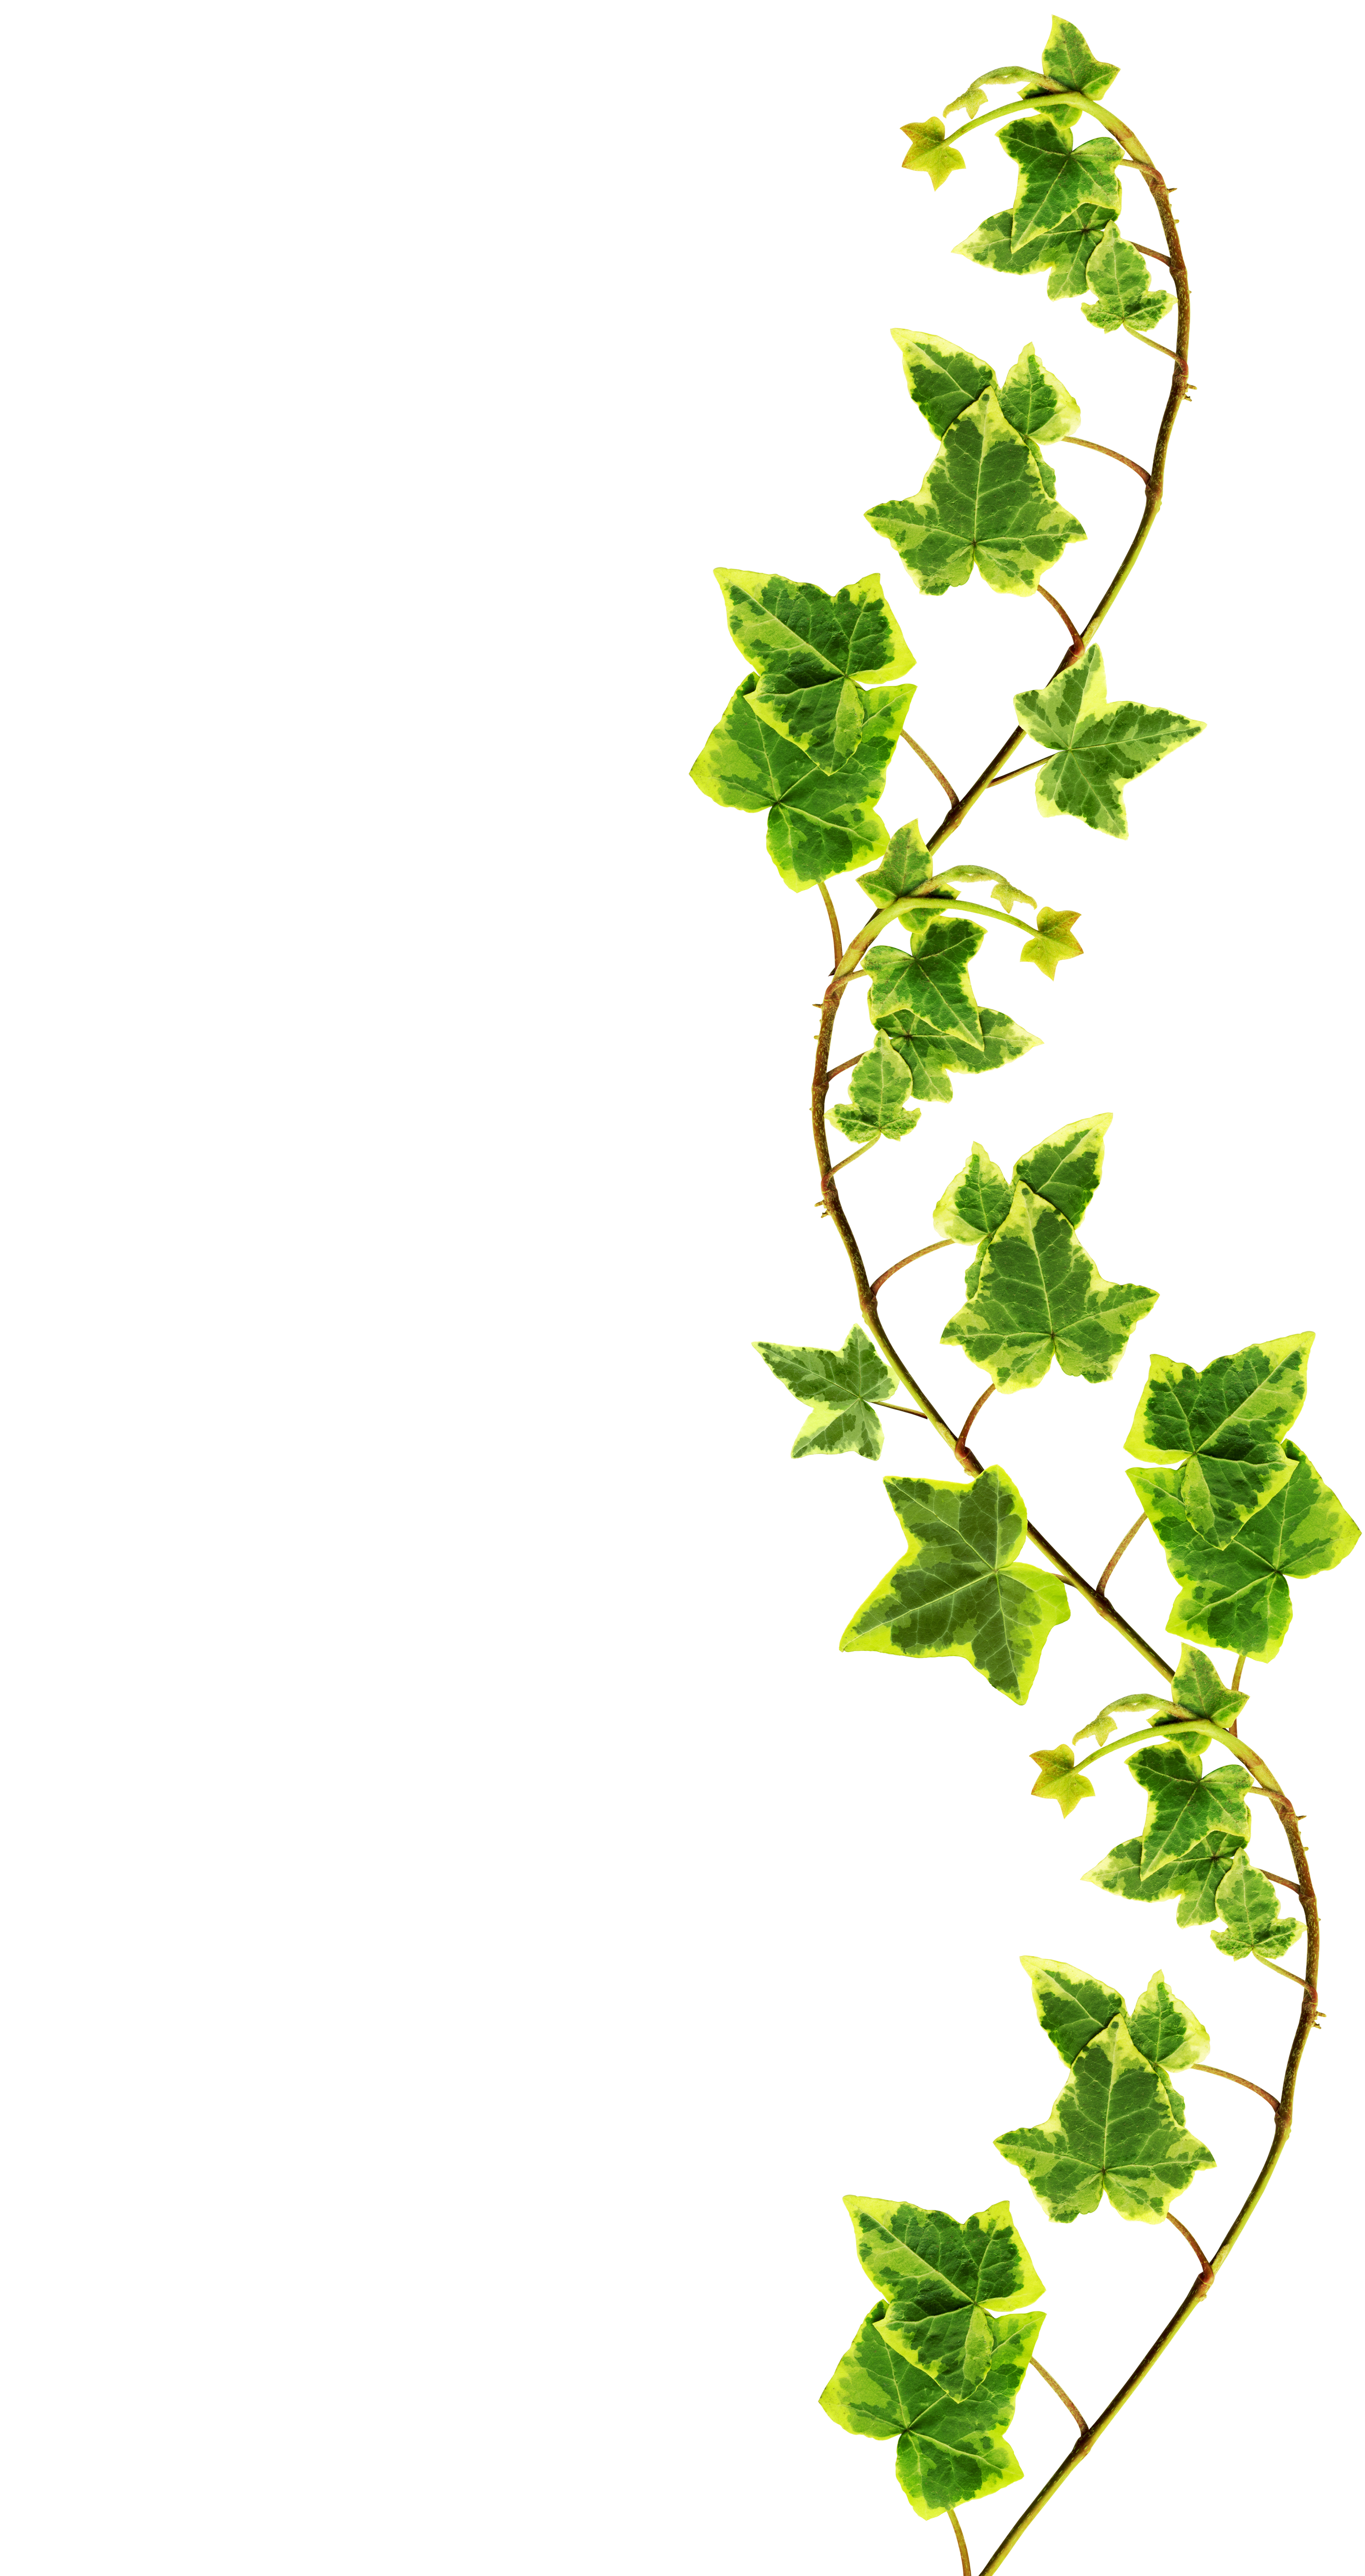 Clipping Path Border Made Of Green Ivy Isolated On White Background